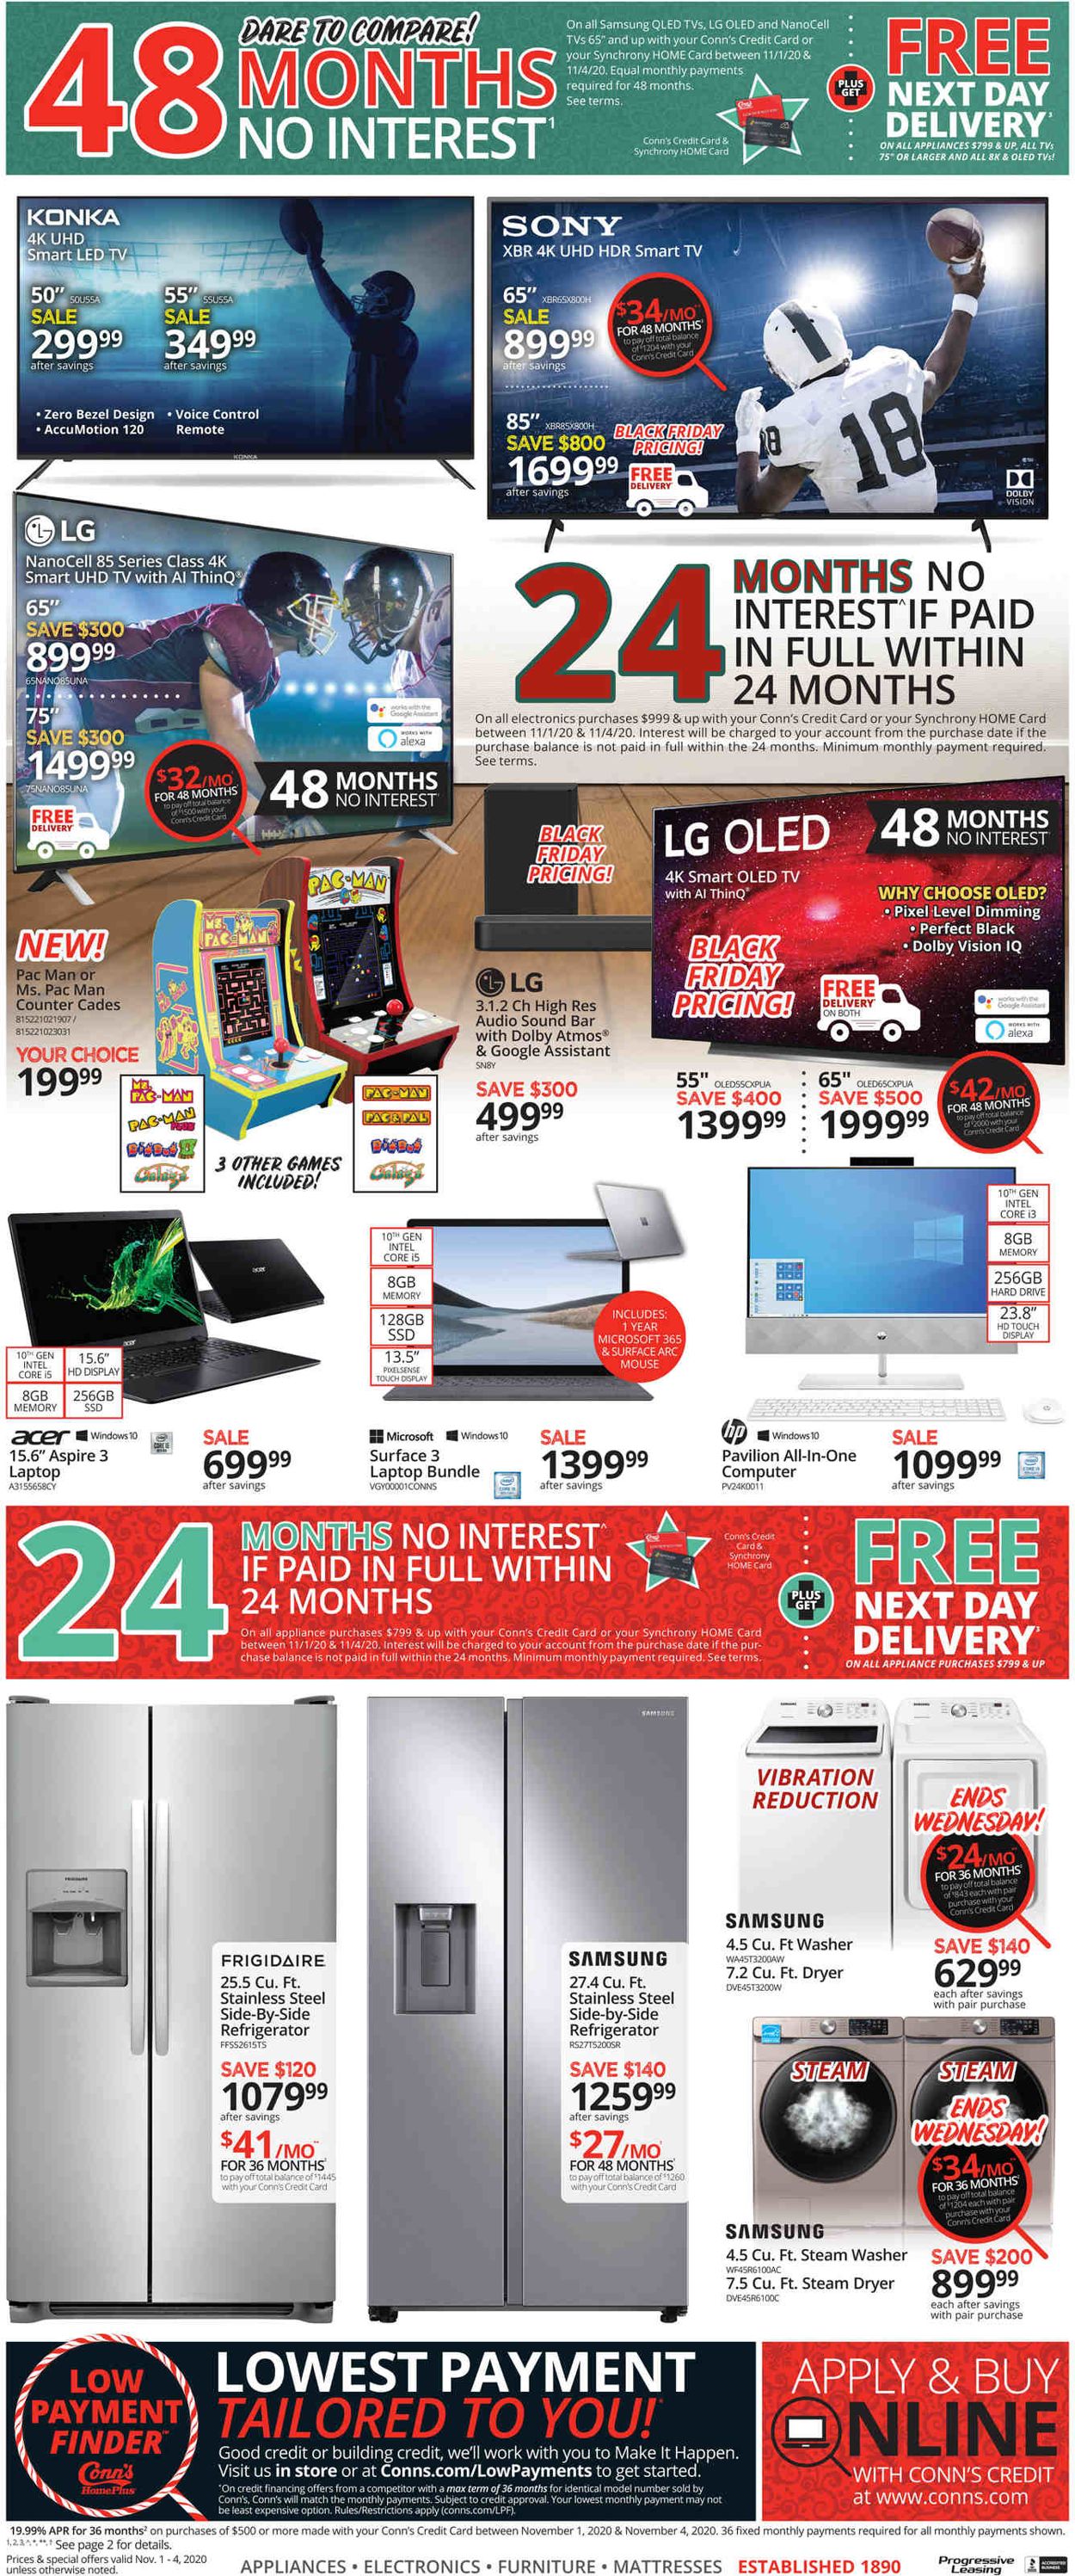 Conn's Home Plus Black Friday 2020 Weekly Ad Circular - valid 11/01-11/04/2020 (Page 4)